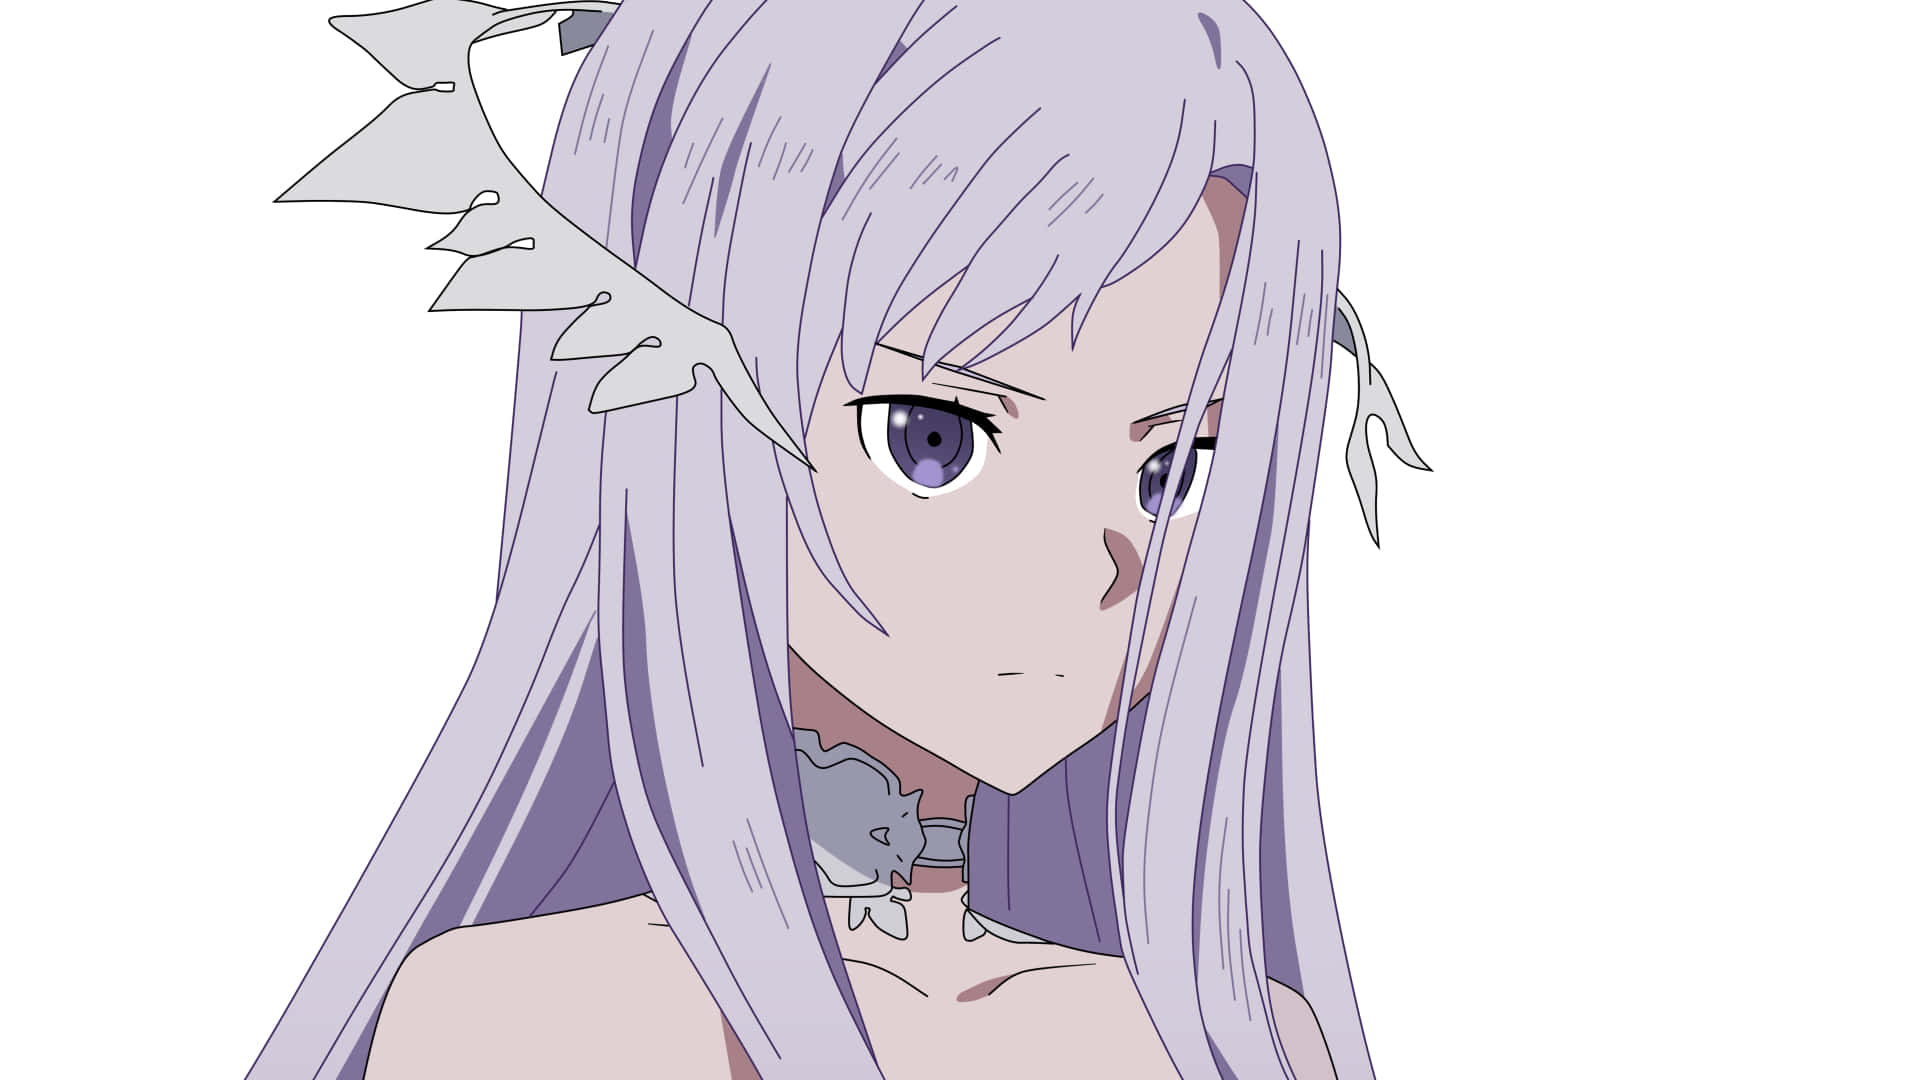 Quinella, the powerful ruler of the virtual world in Sword Art Online Wallpaper